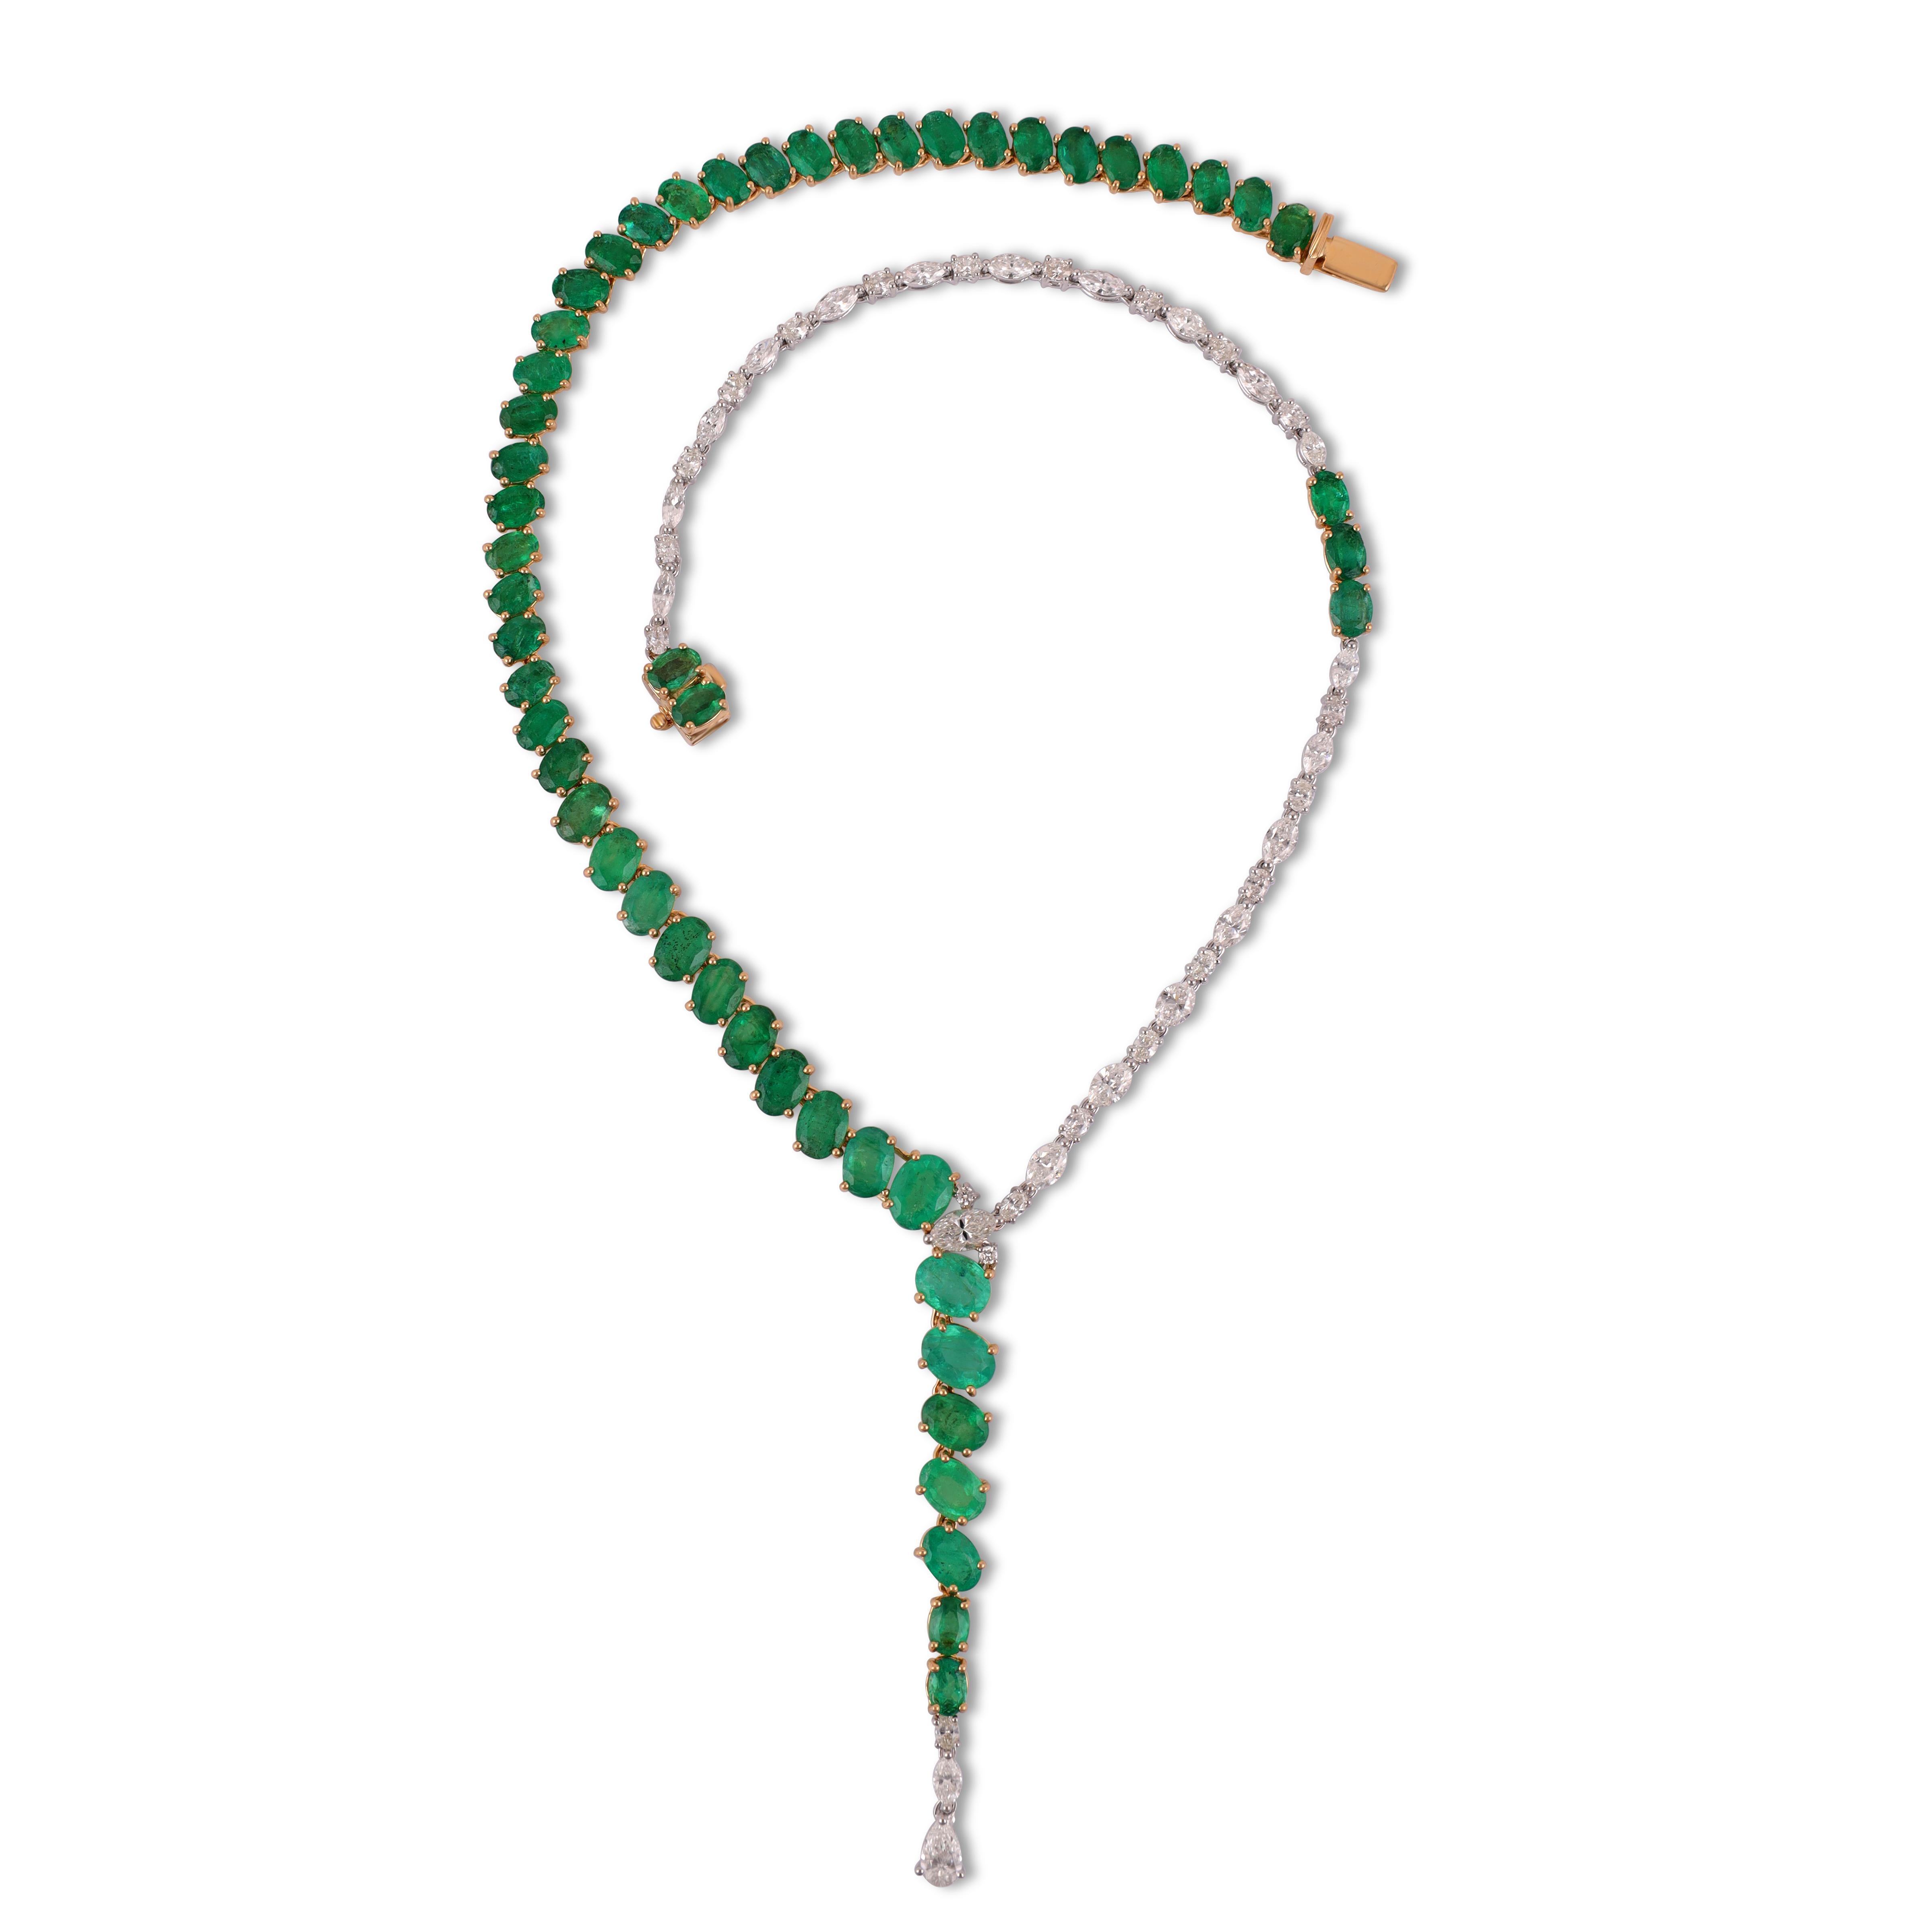 Magnificent Emerald & Diamond Necklace
Emerald necklace with 51 Oval shaped emeralds approximately 26.73 cts.
21 diamonds approximately 1.65 cts Full cut 
21 diamonds approximately 3.53 cts Rose cut 
 26.67gm Gold 18k
With Earrings  
Earrings